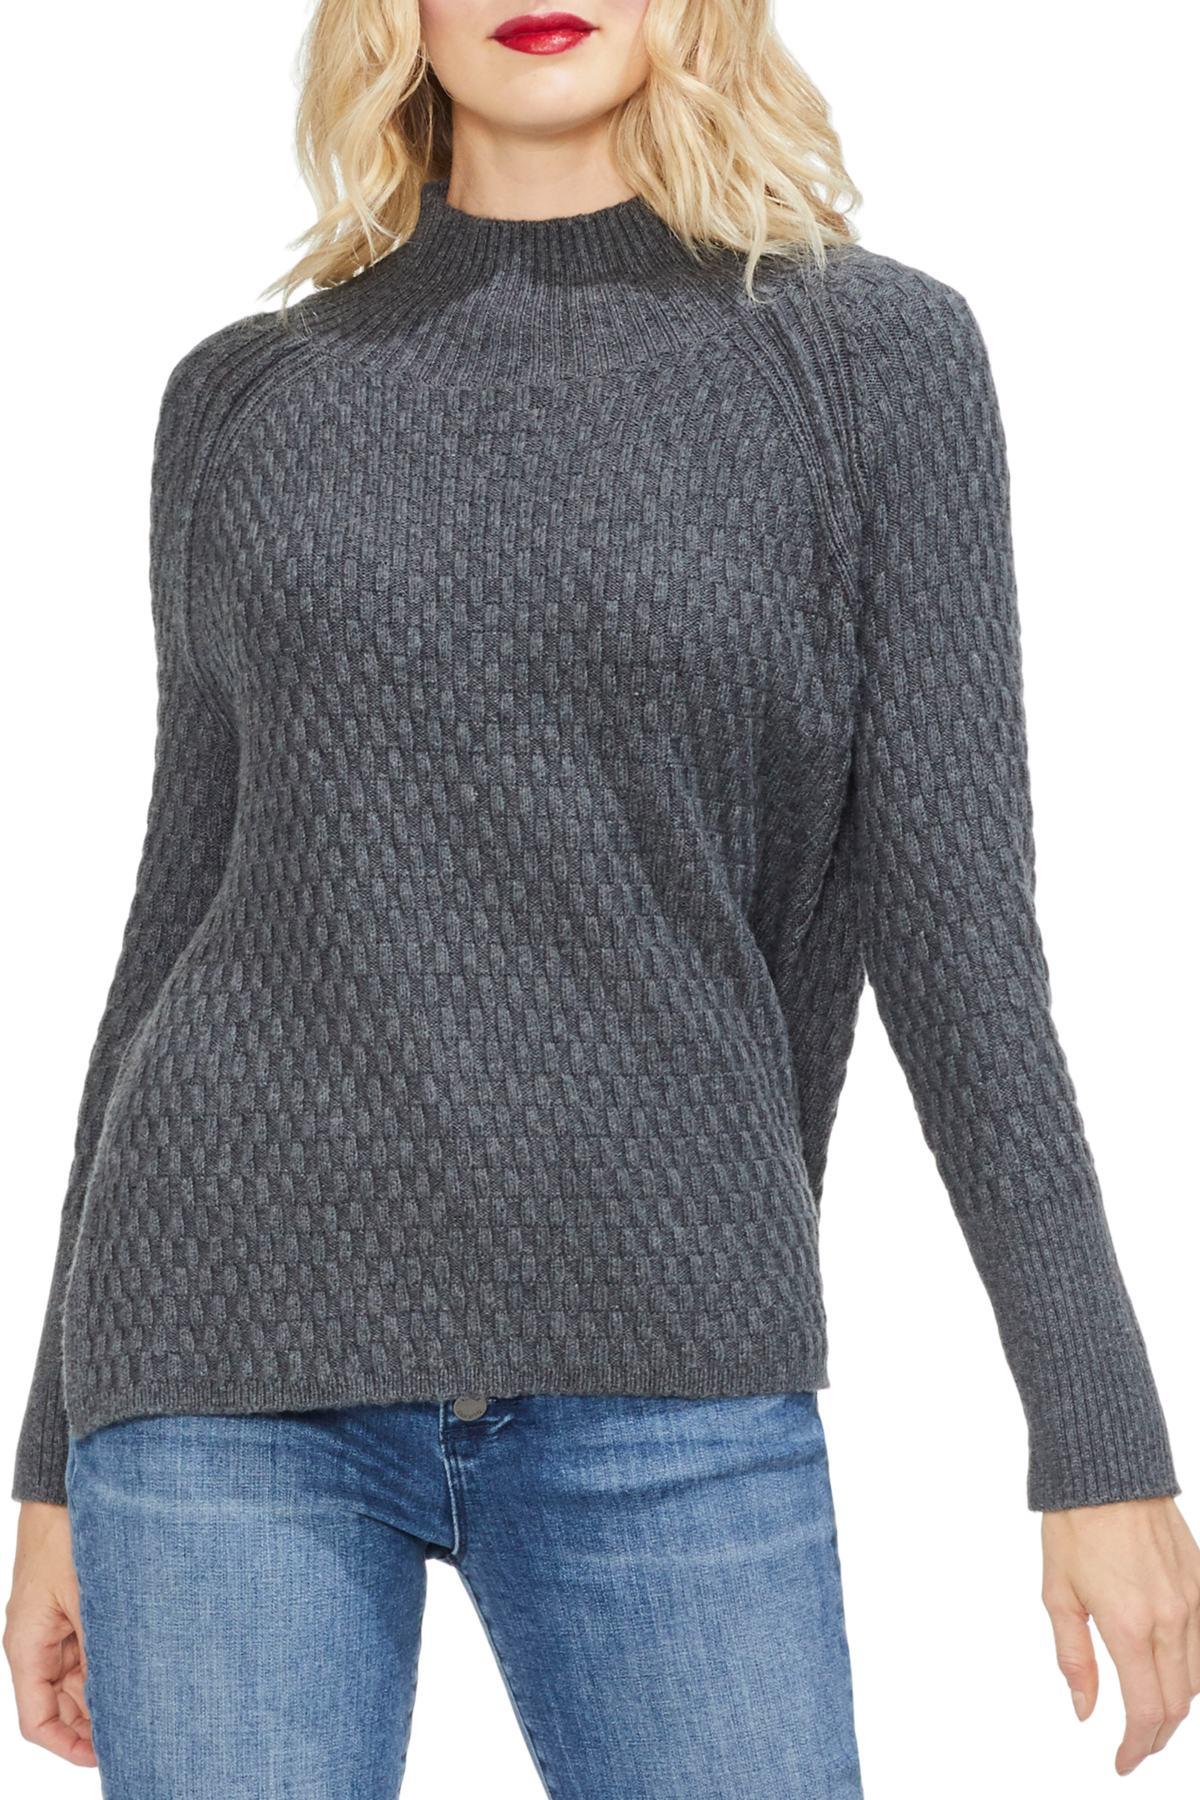 Download Lyst - Vince Camuto Mock Neck Raglan Sweater in Gray - Save 48%